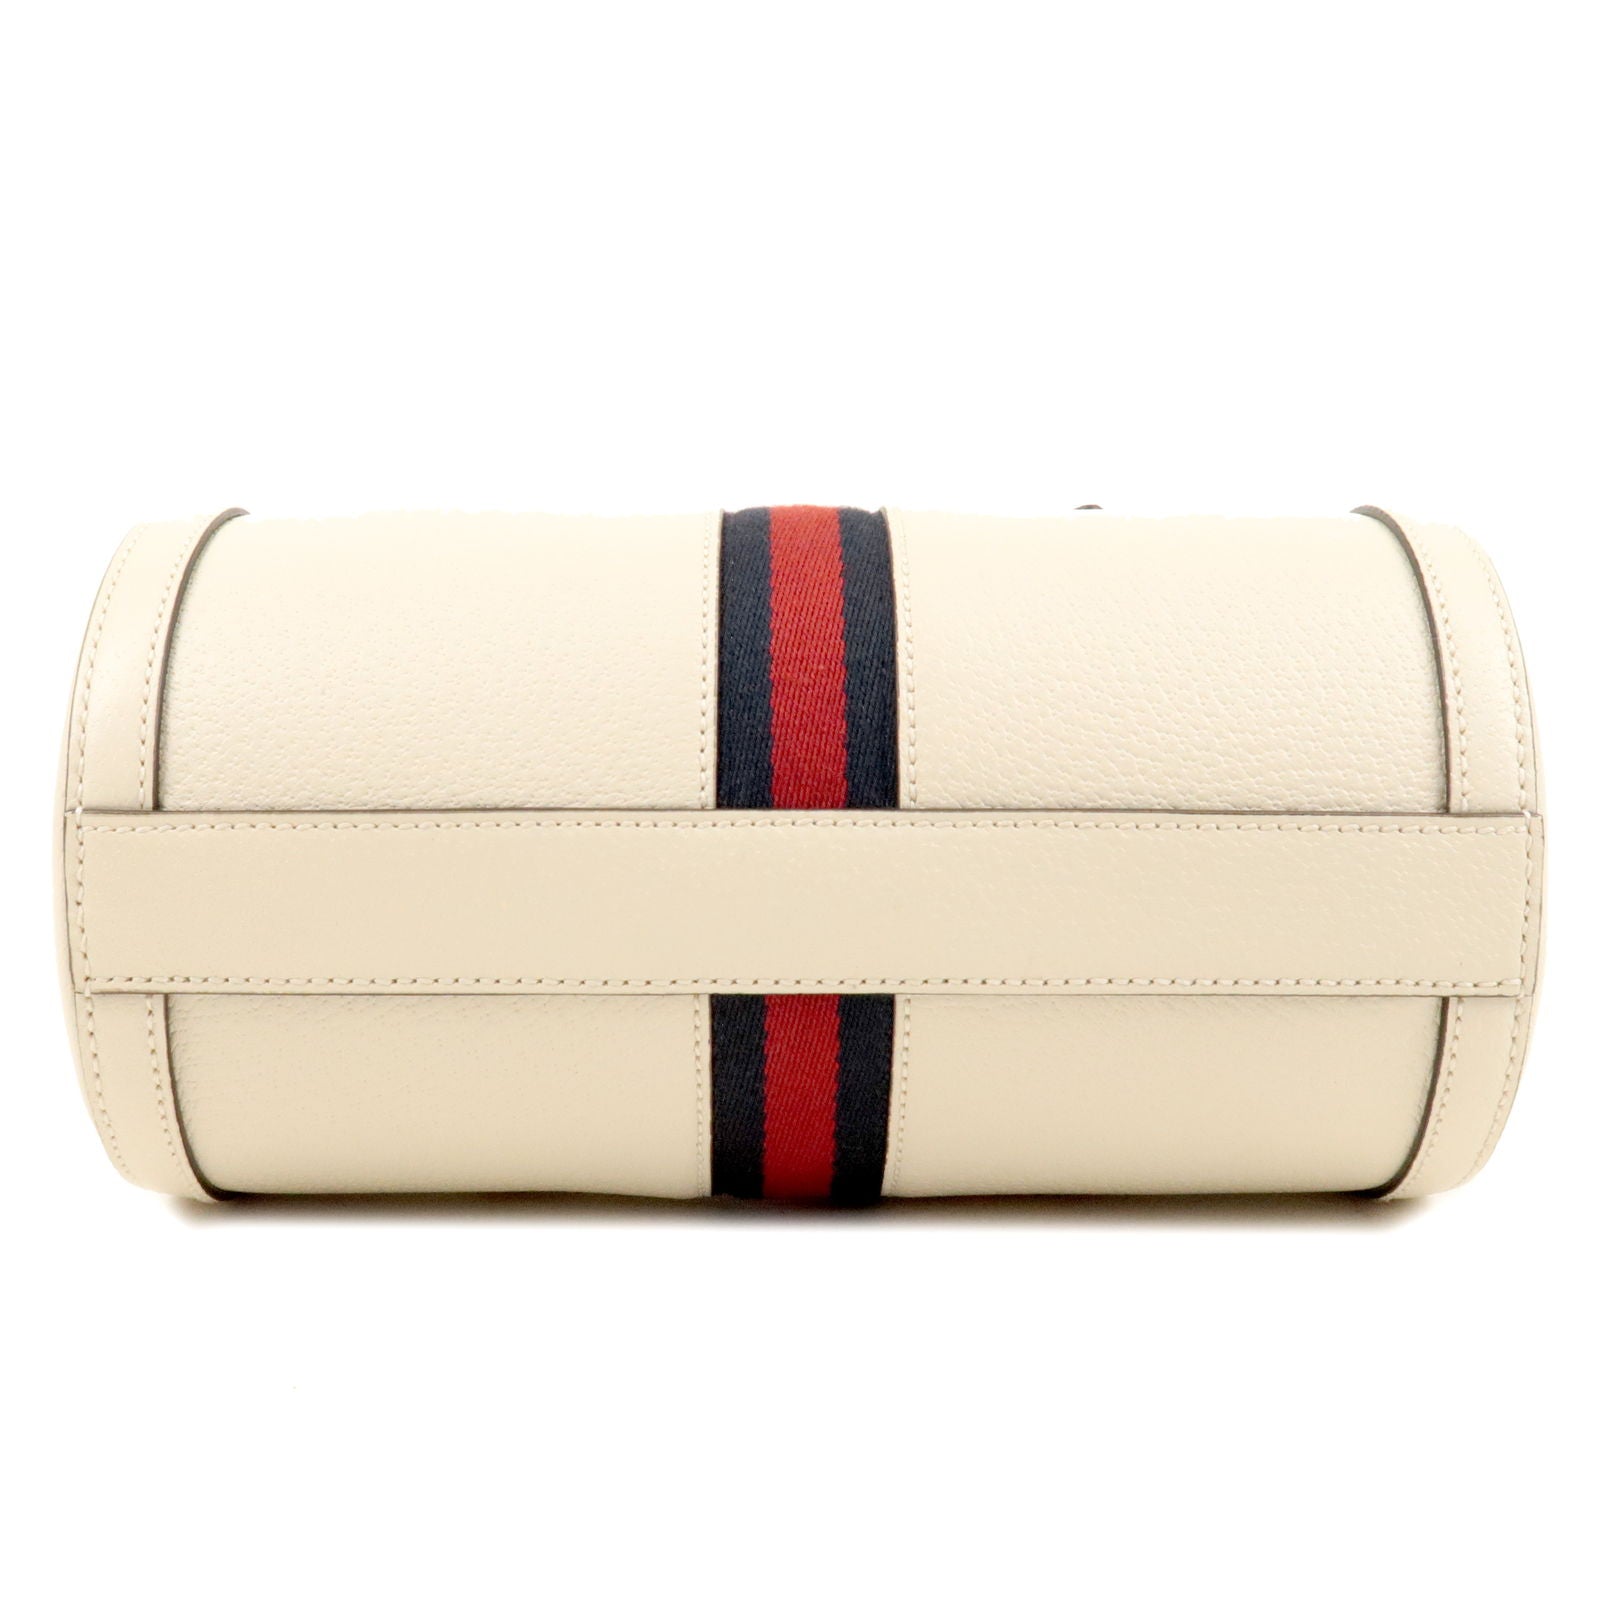 GUCCI-Ophidia-Leather-2Way-Bag-Mini-Boston-Bag-Ivory-602577 – dct